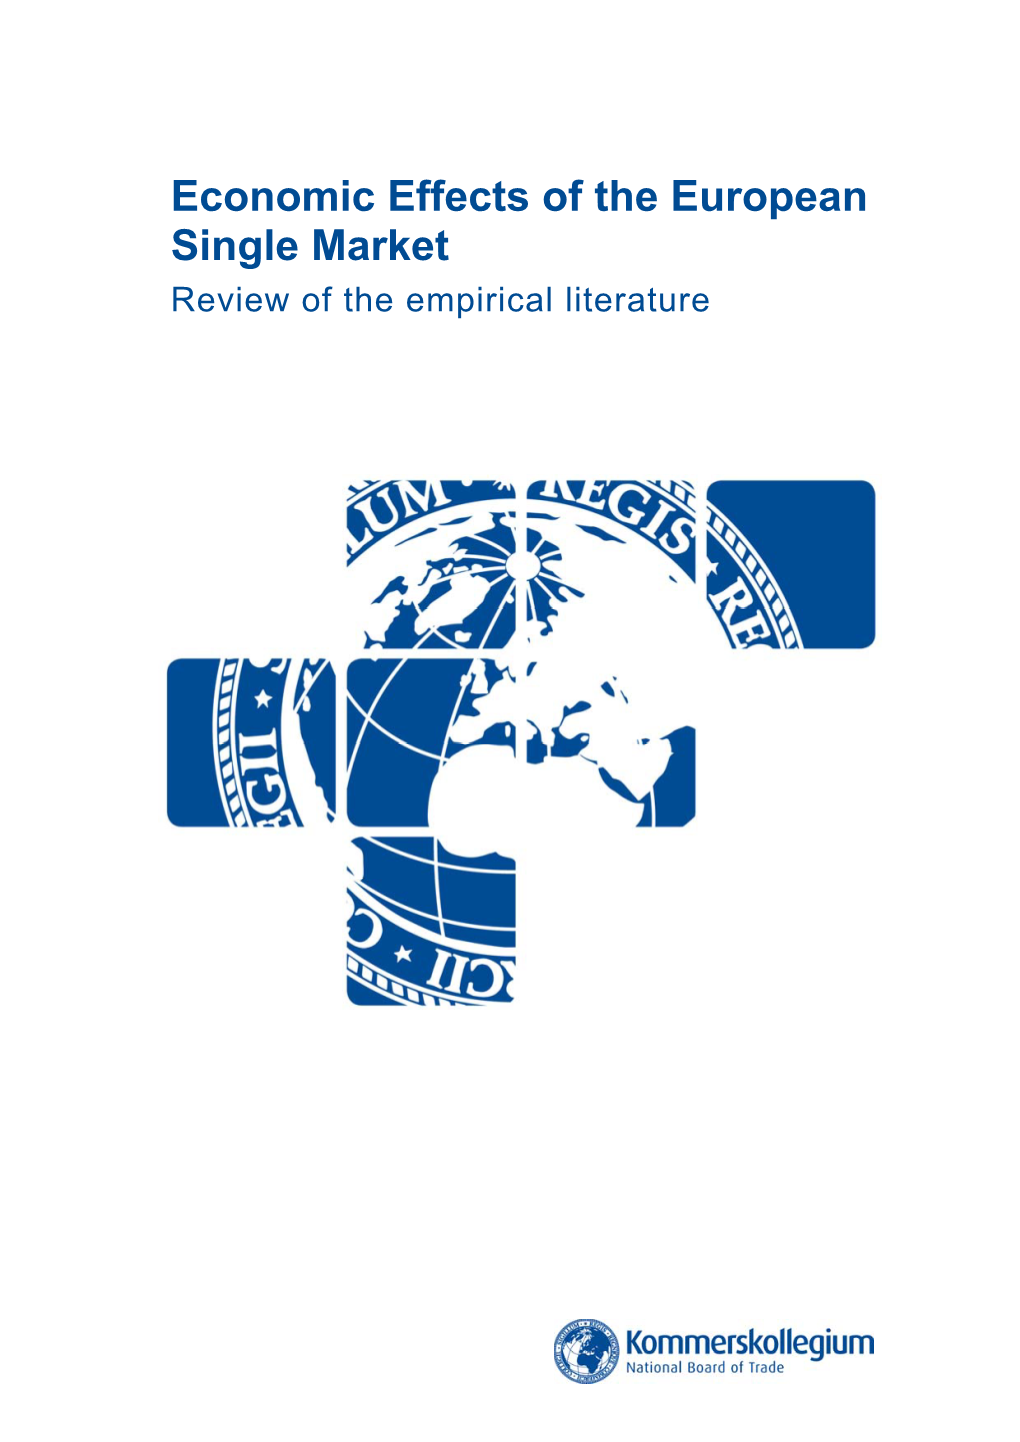 Economic Effects of the European Single Market Review of the Empirical Literature